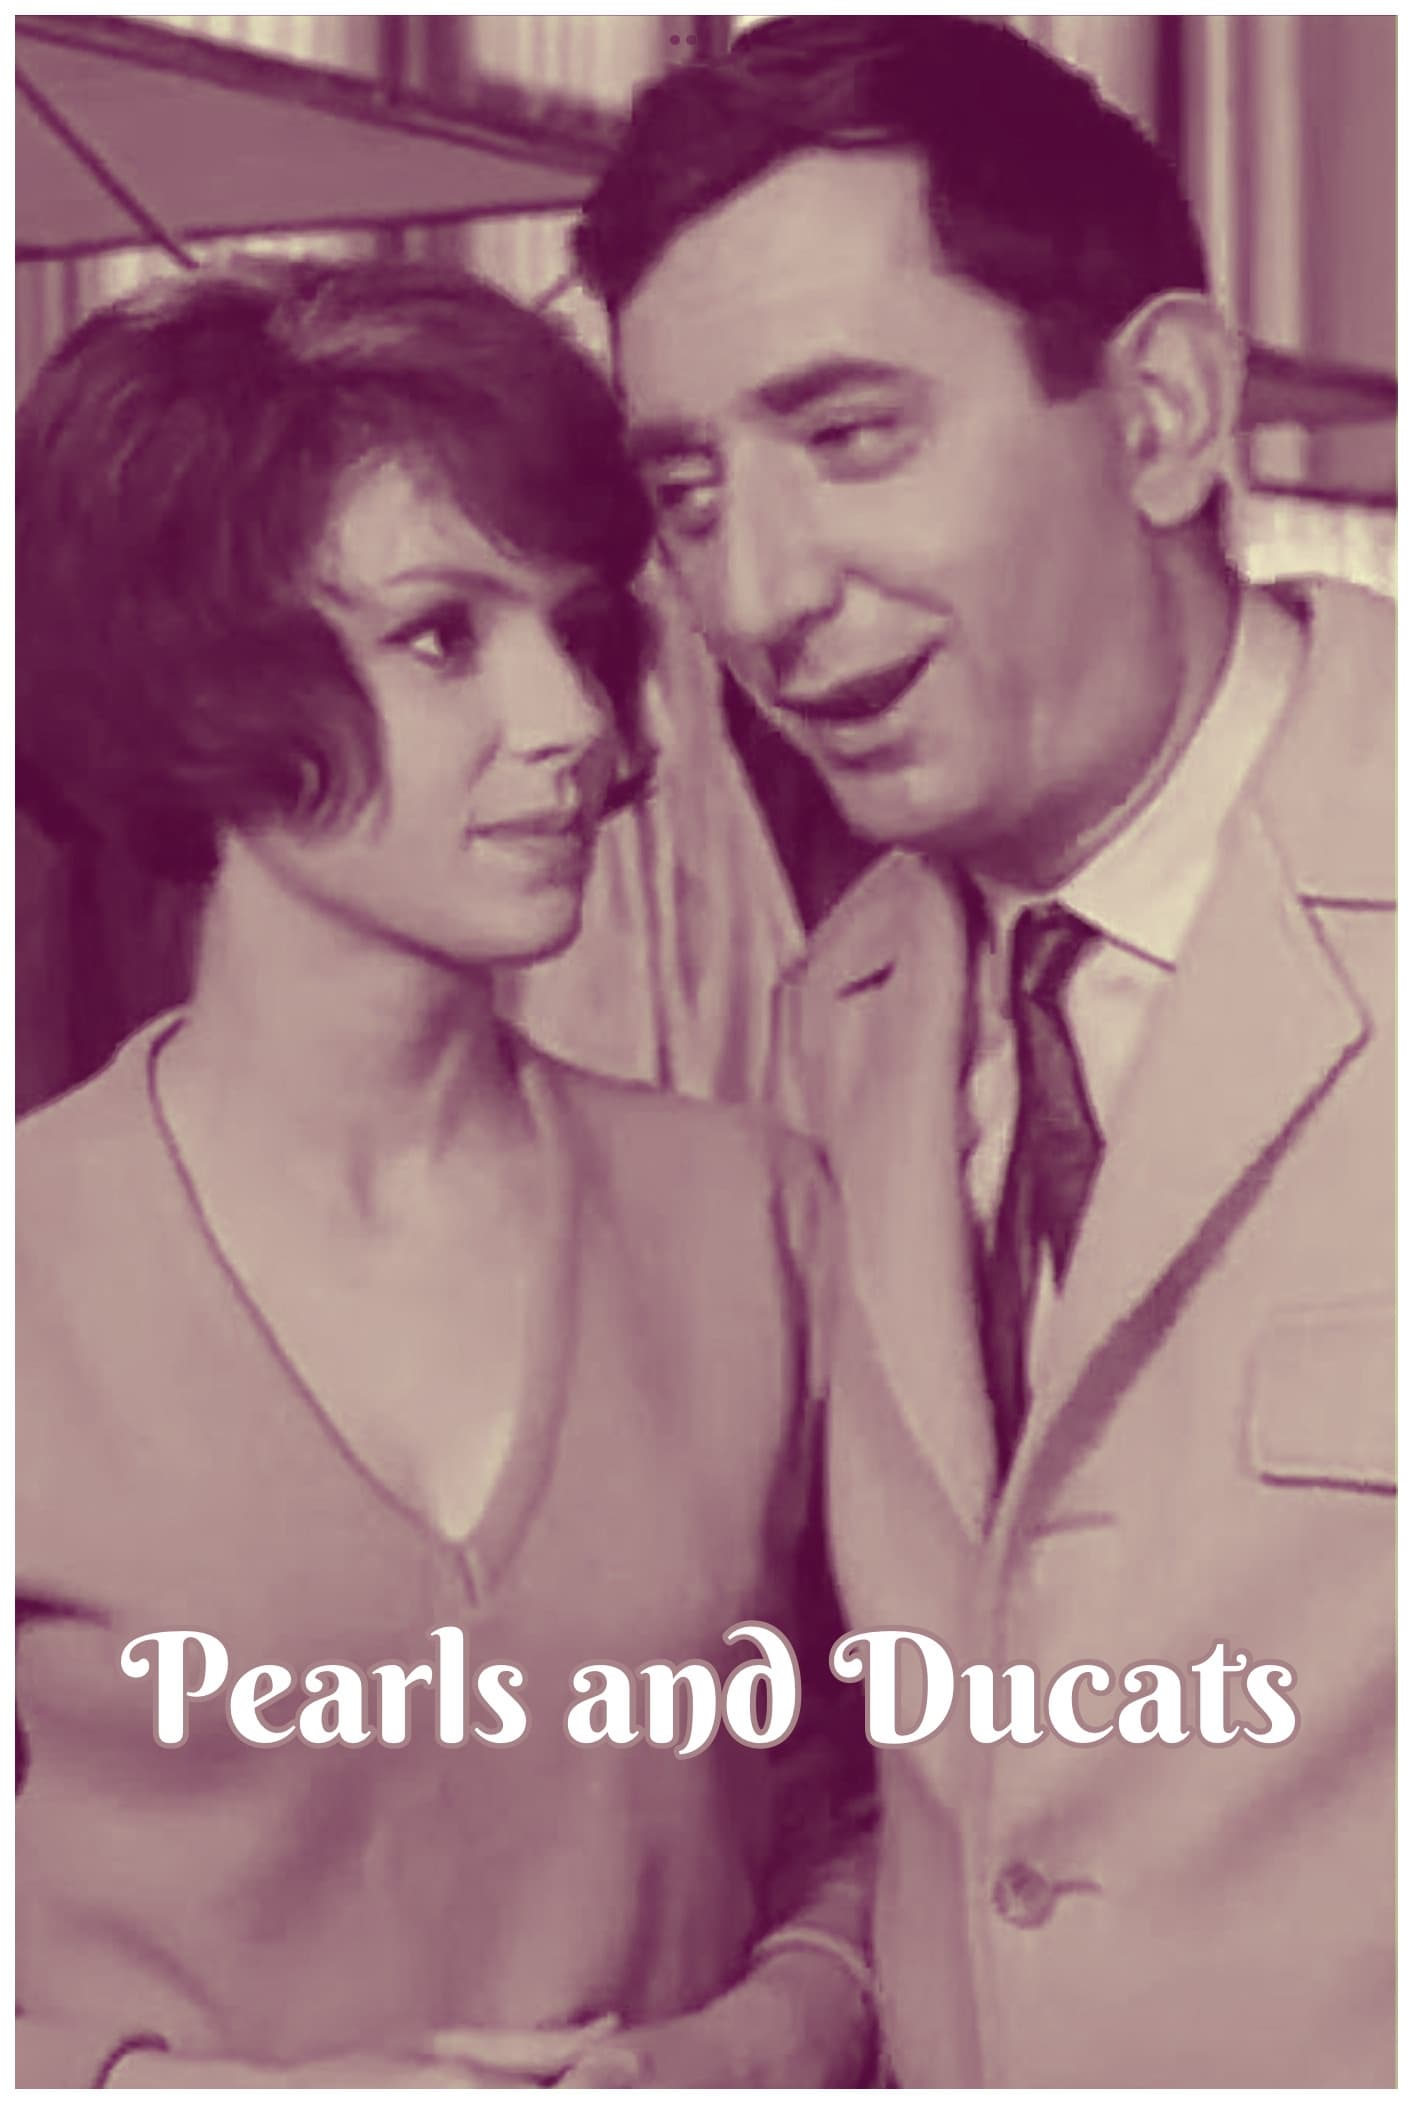 Pearls and Ducats